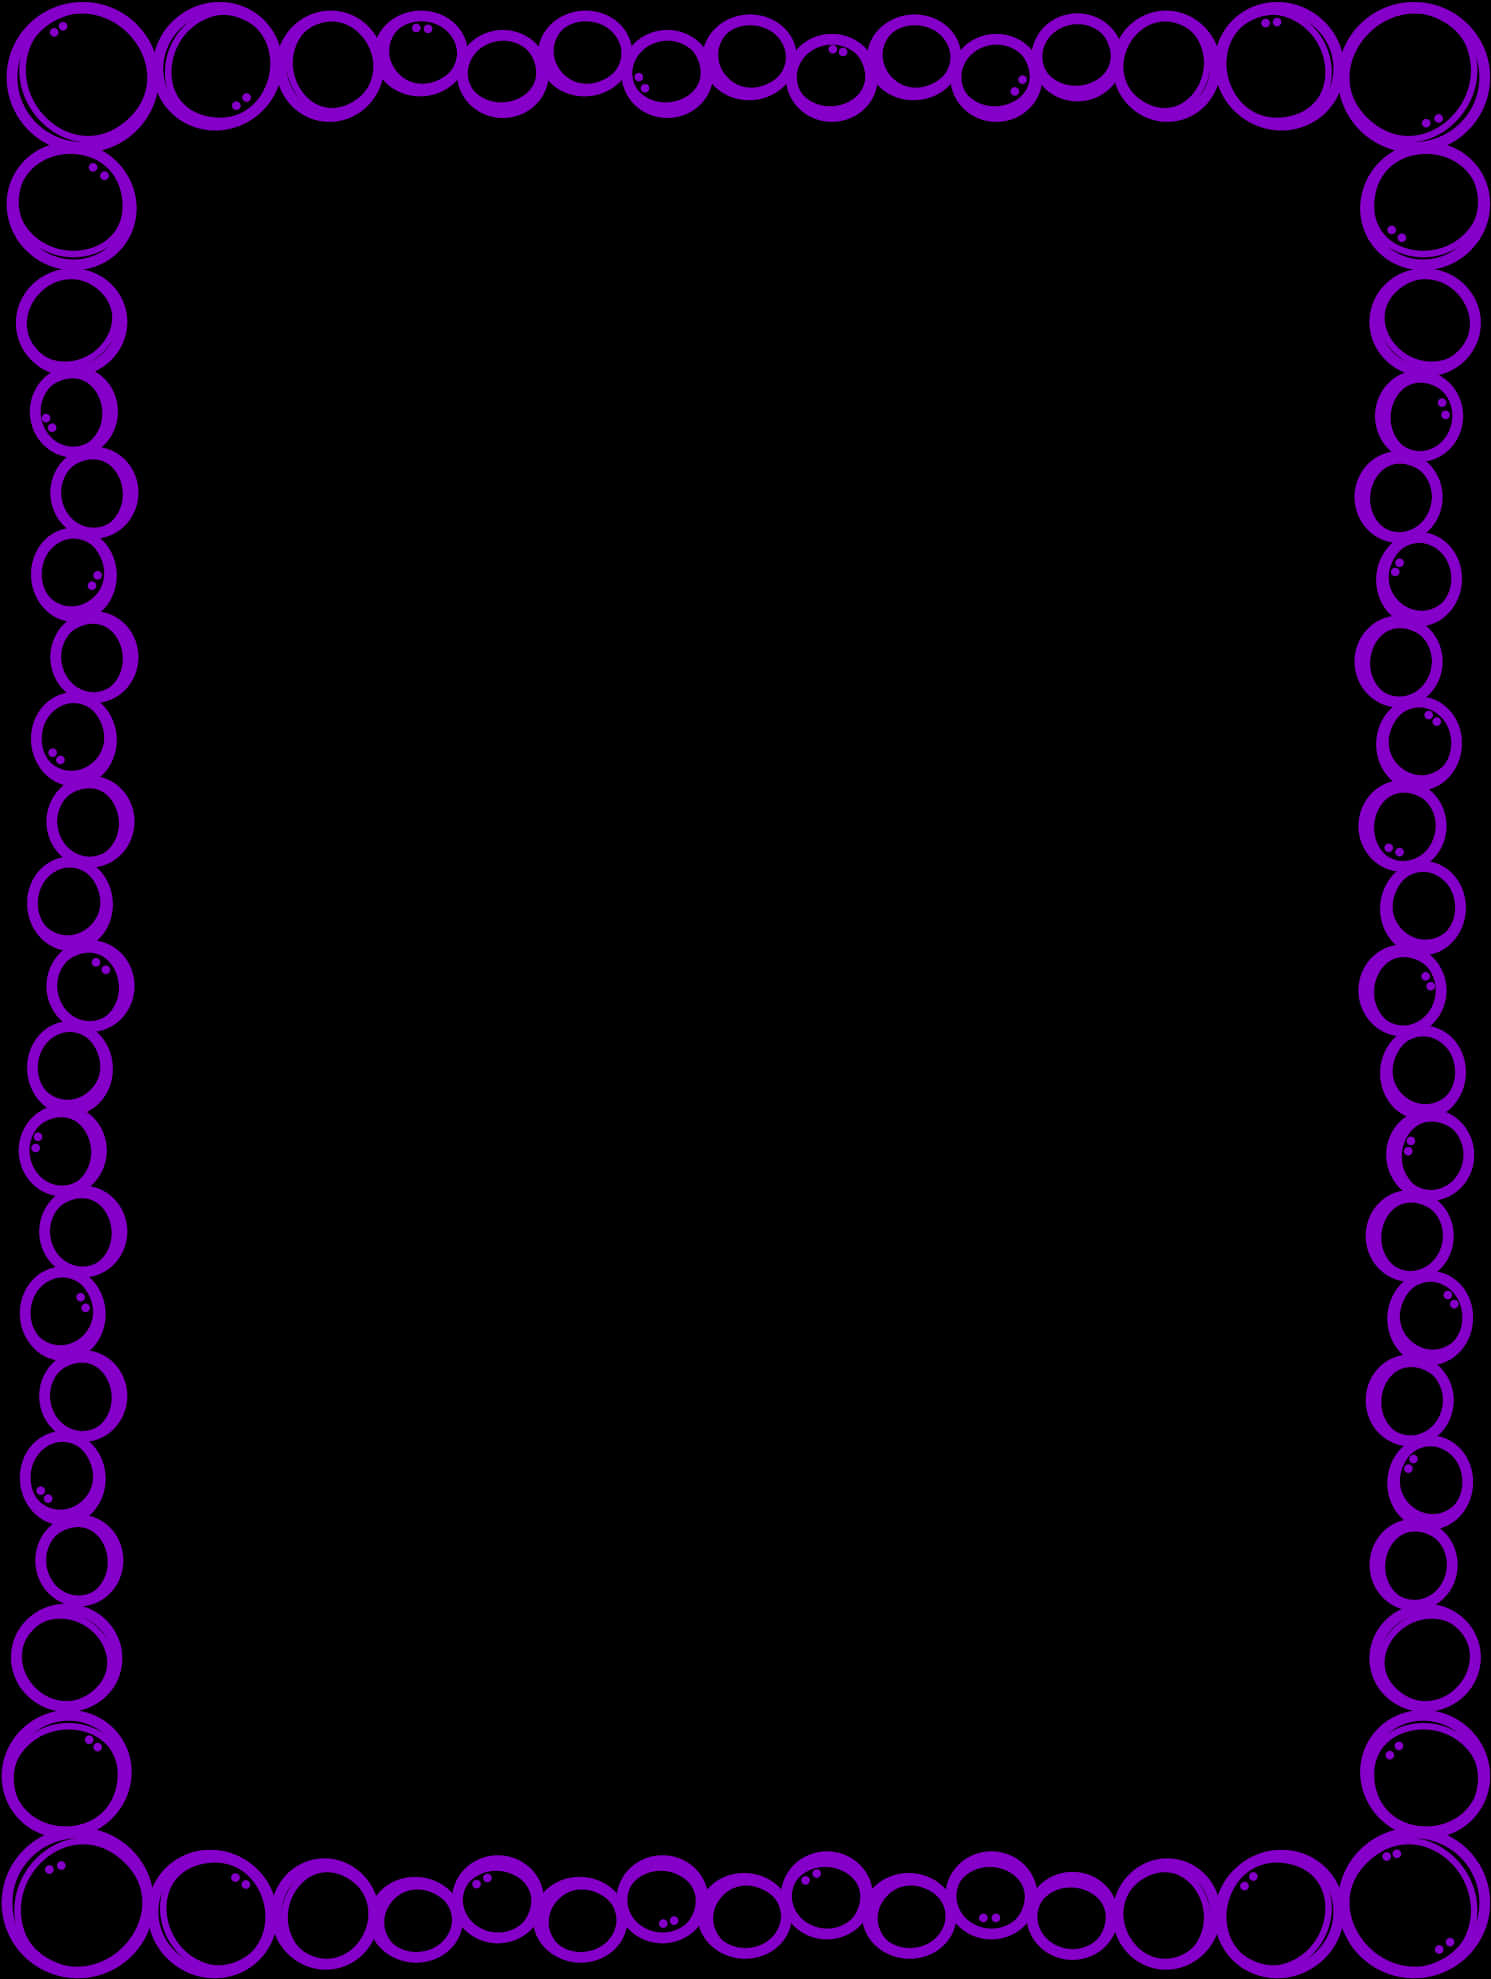 A Purple Circles On A Black Background